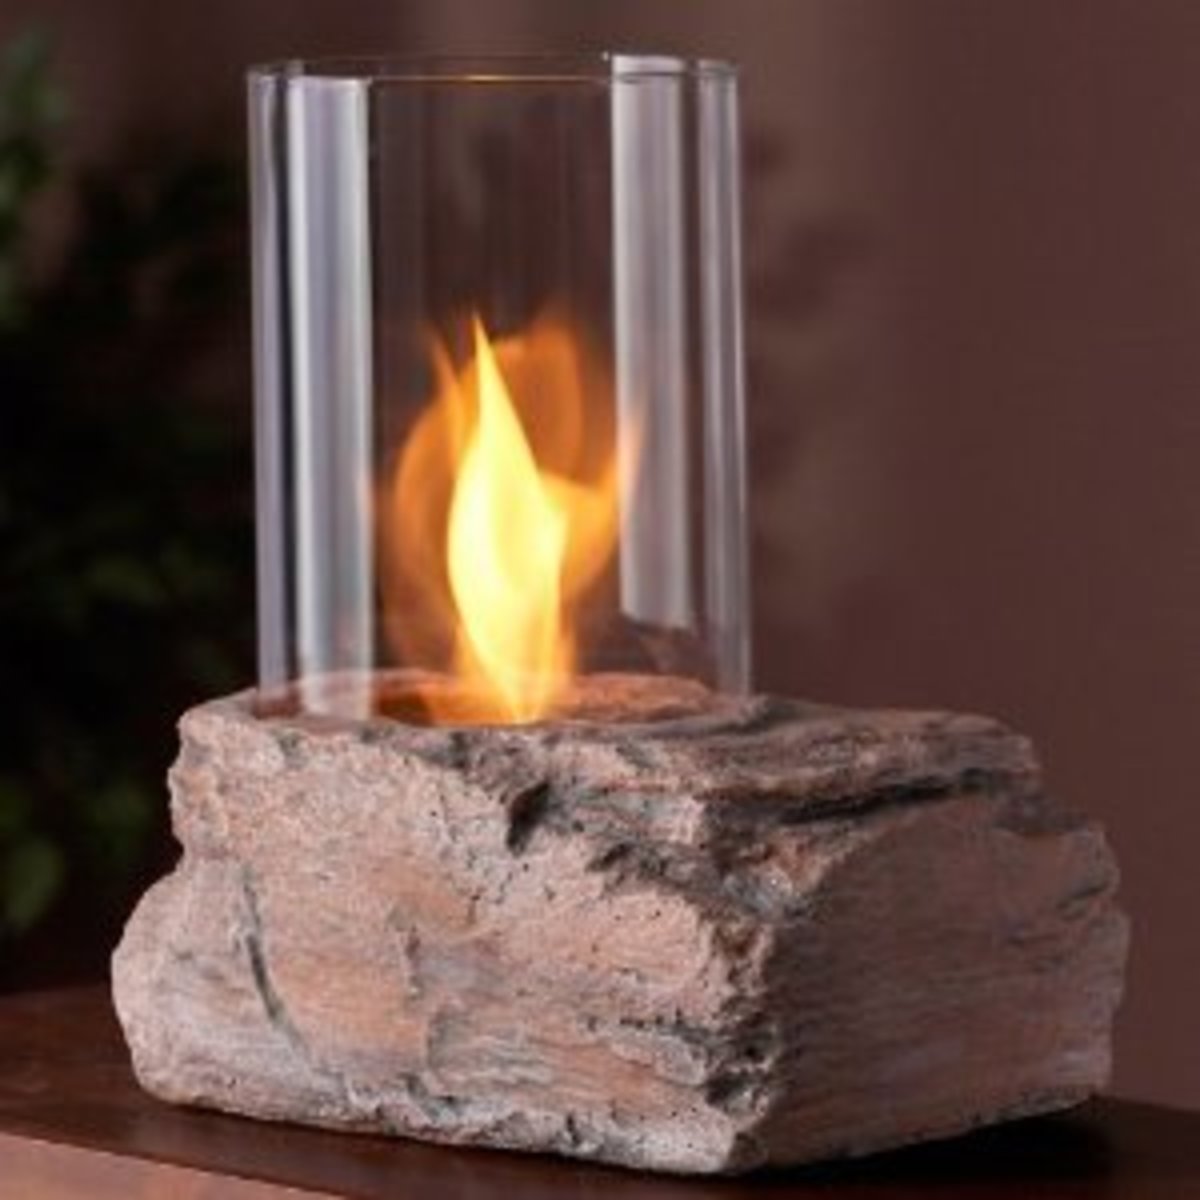 A gel fuel personal outdoor fireplace.